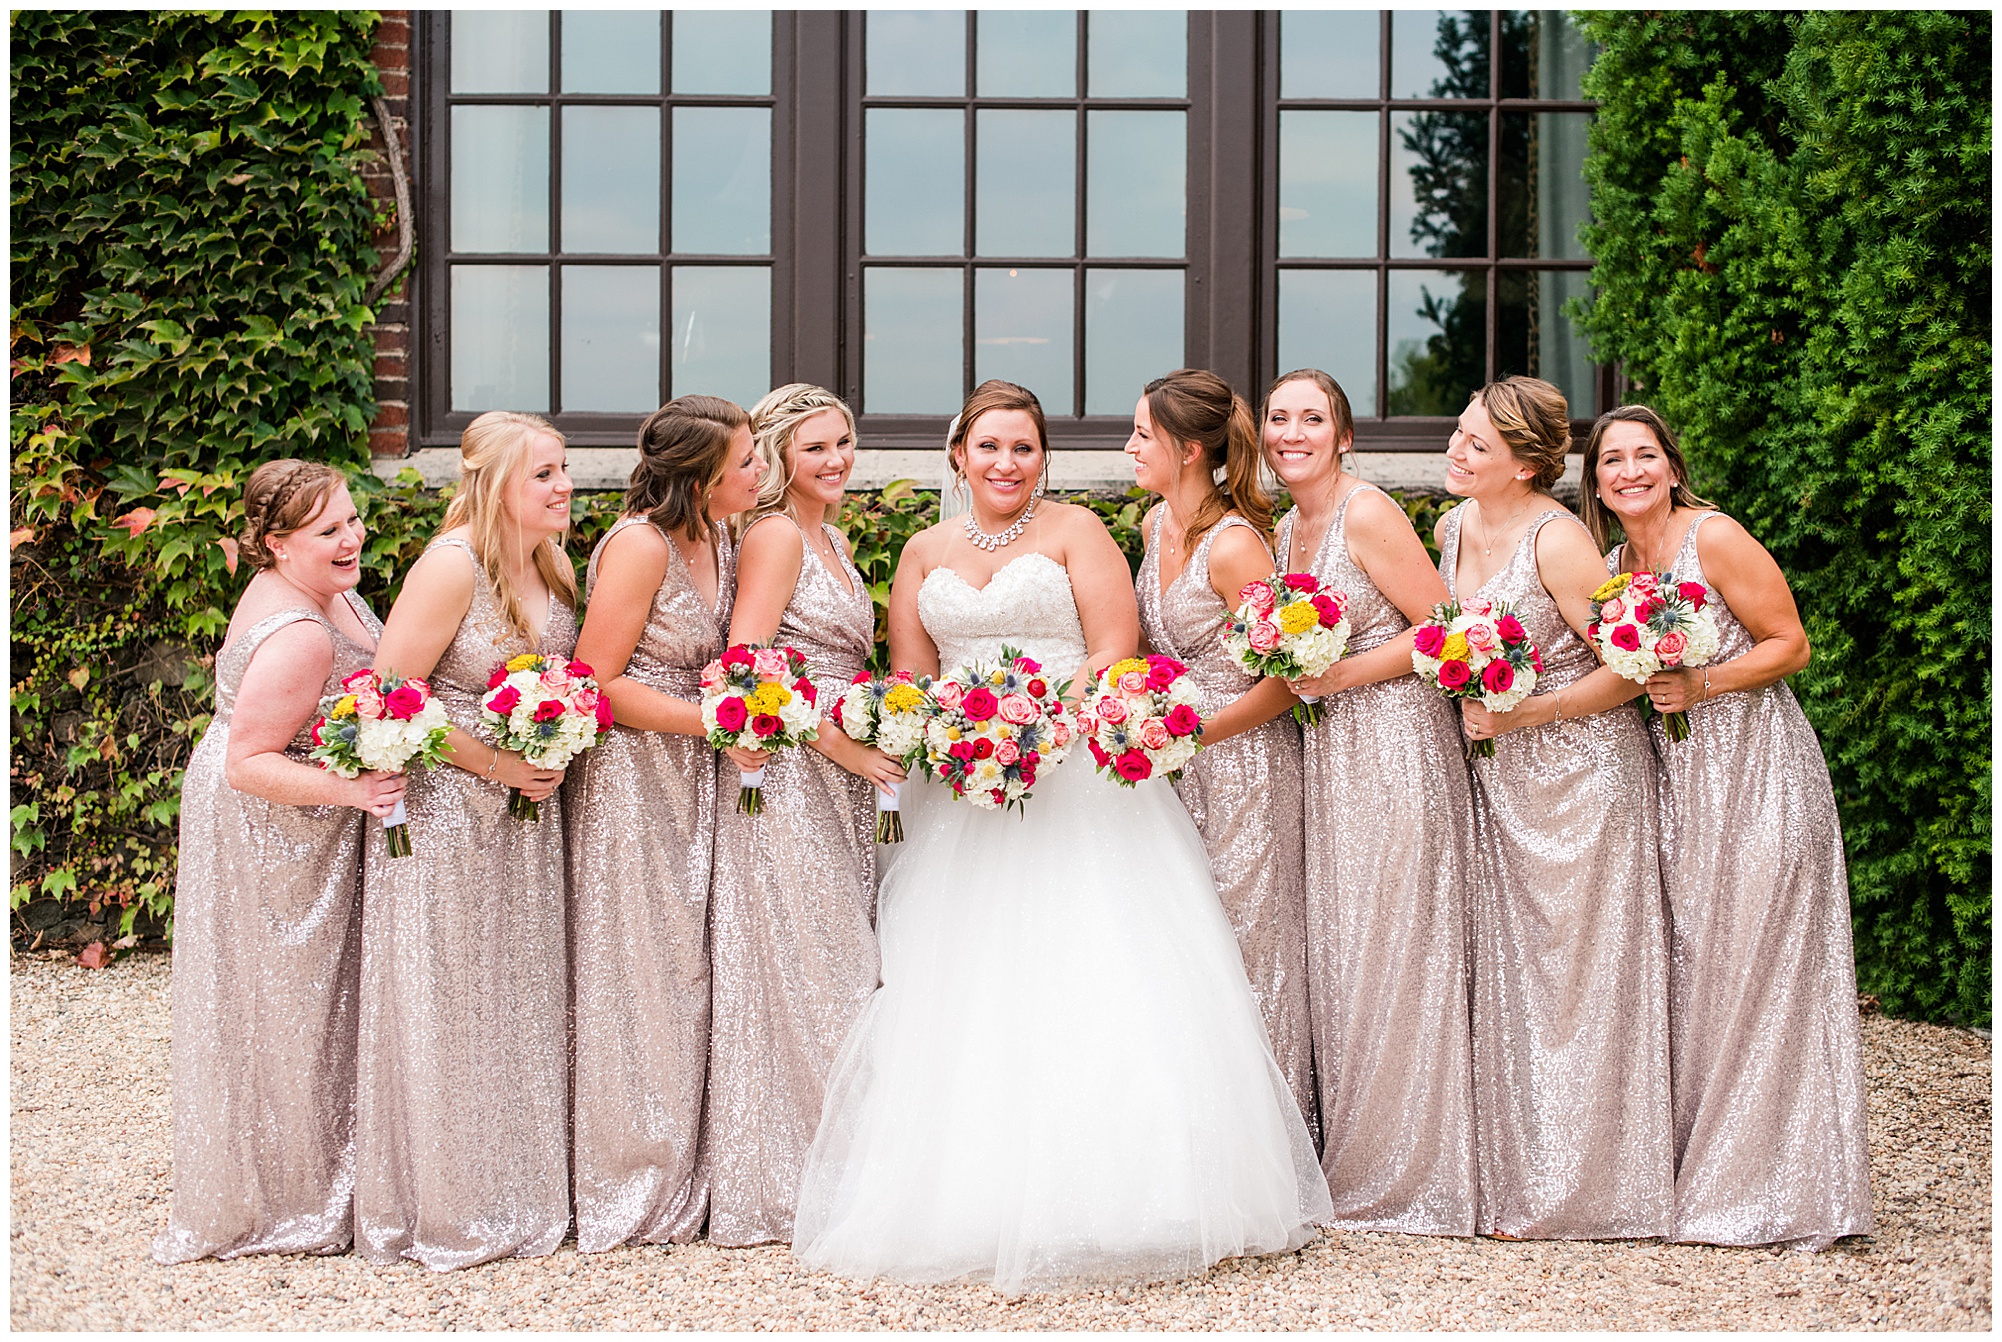 bride and bridesmaids wedding party photo at dover hall richmond rva in september fall